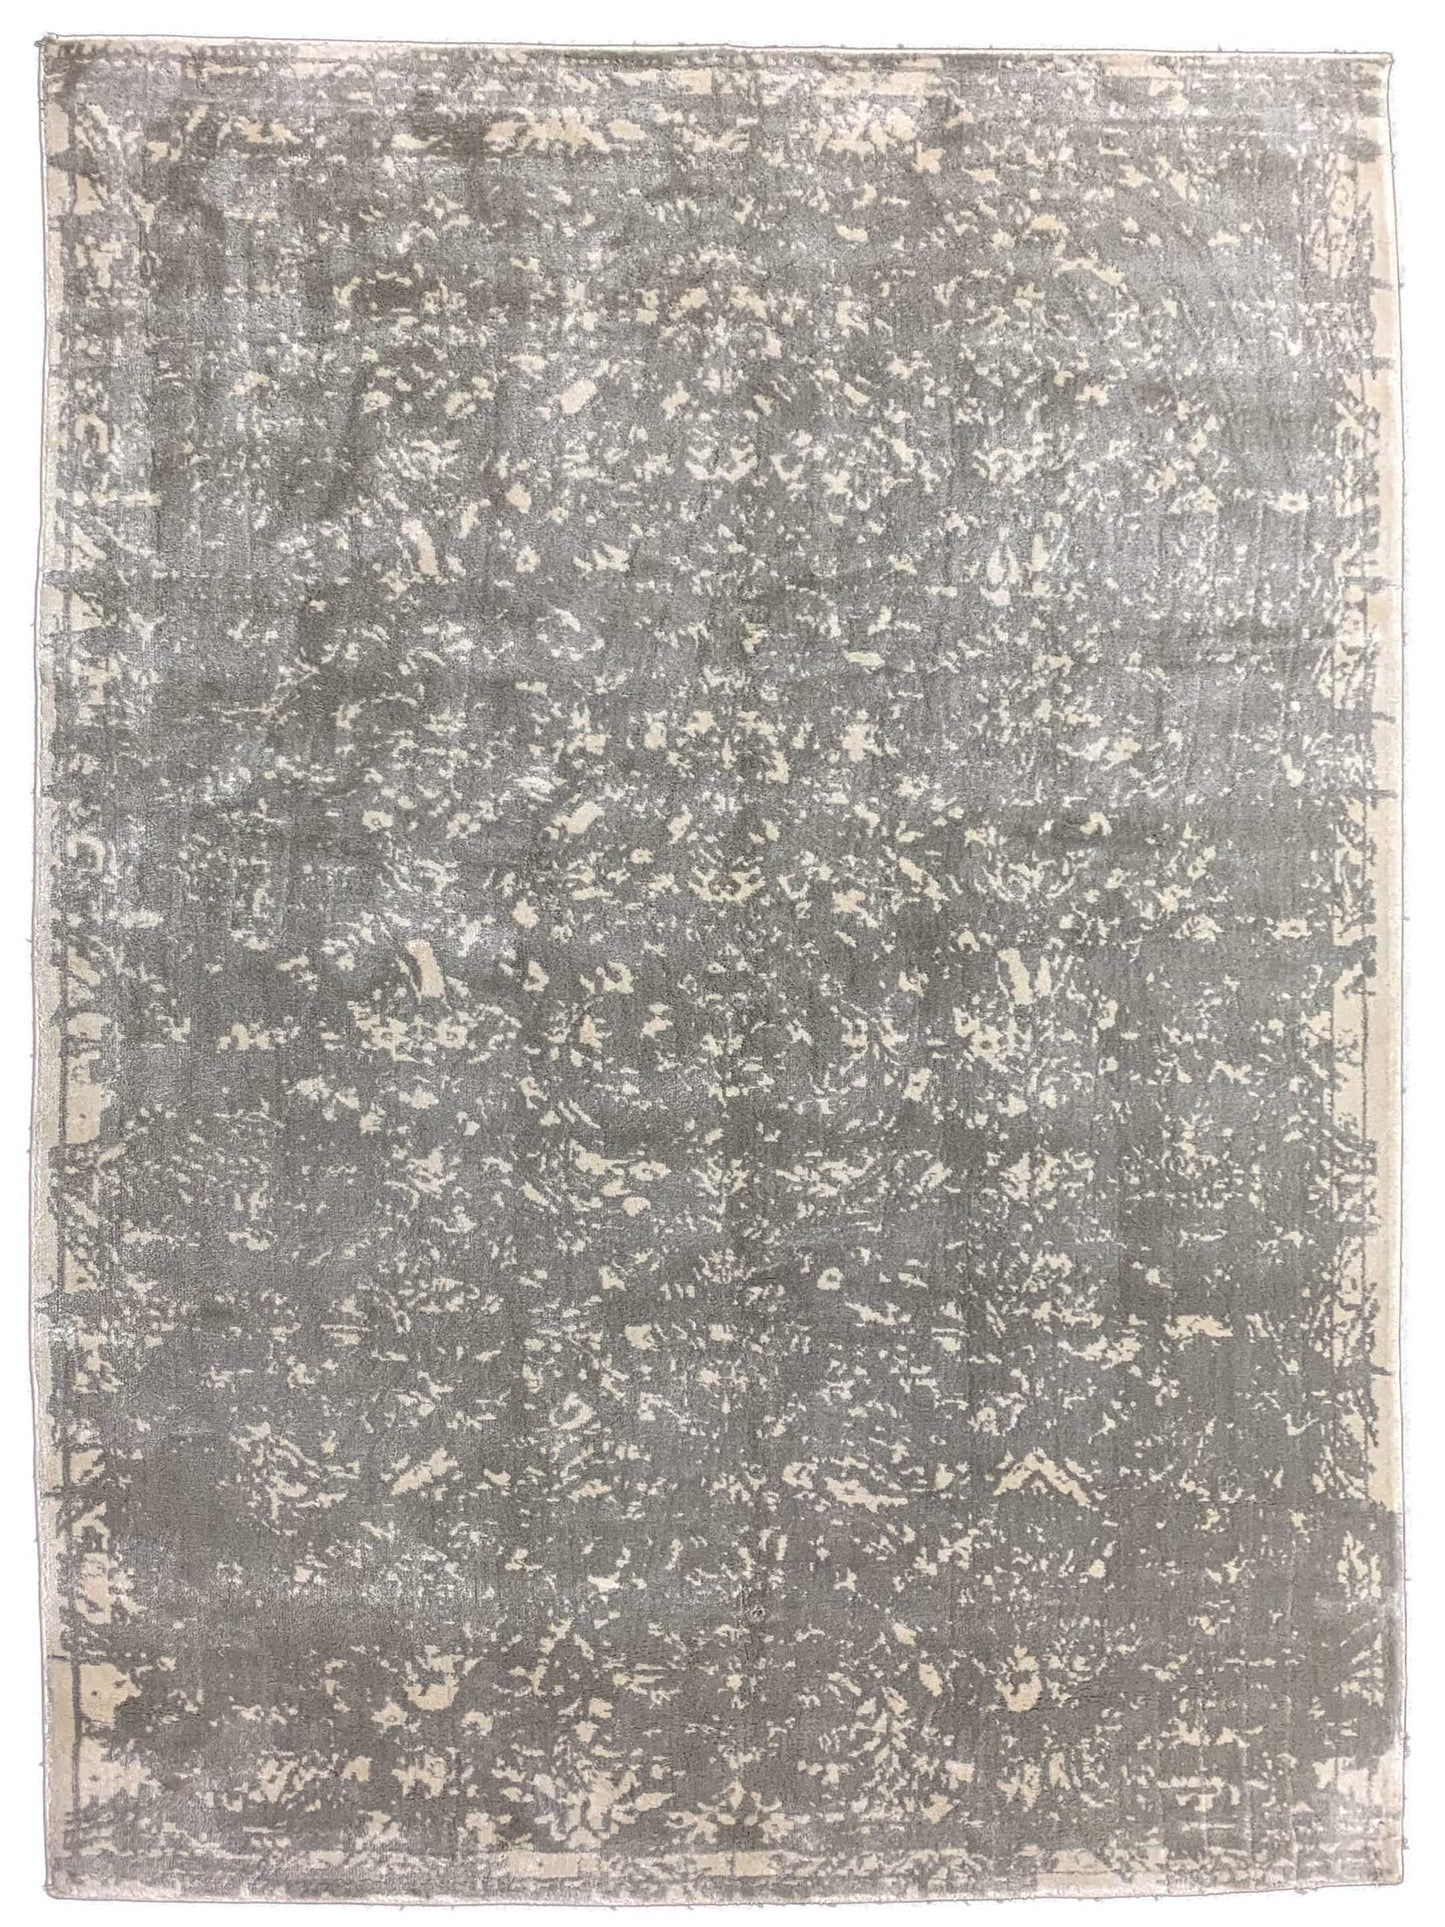 Artisan Lucy Lux-2 Lt.Grey Transitional Machinemade Rug